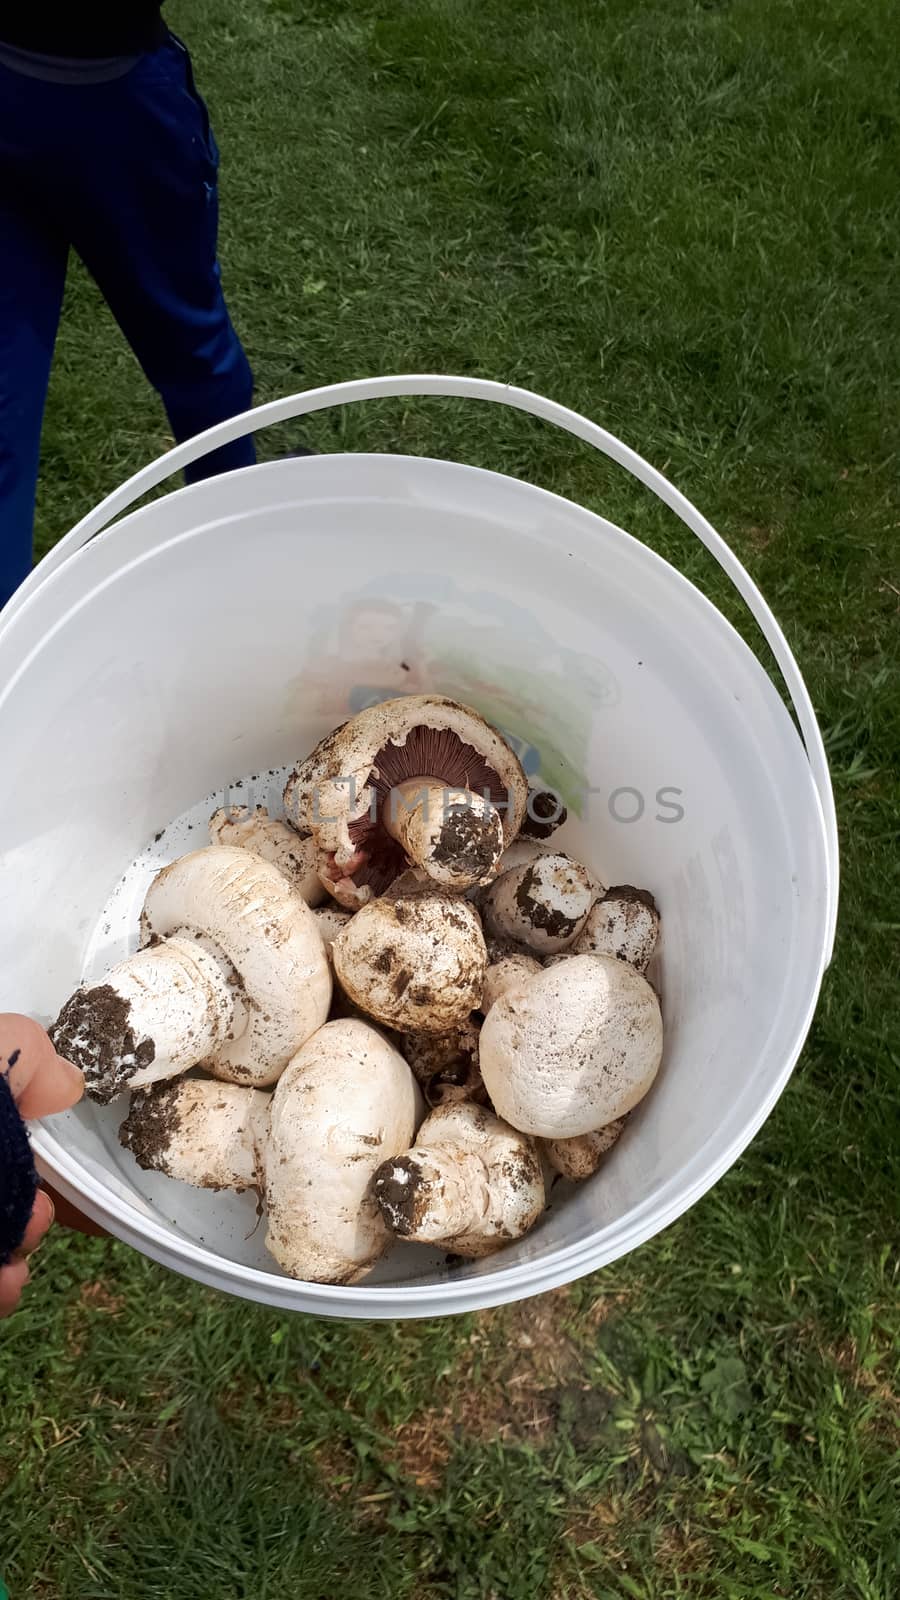 White champignons collected in a bucket. Mushroom picking.